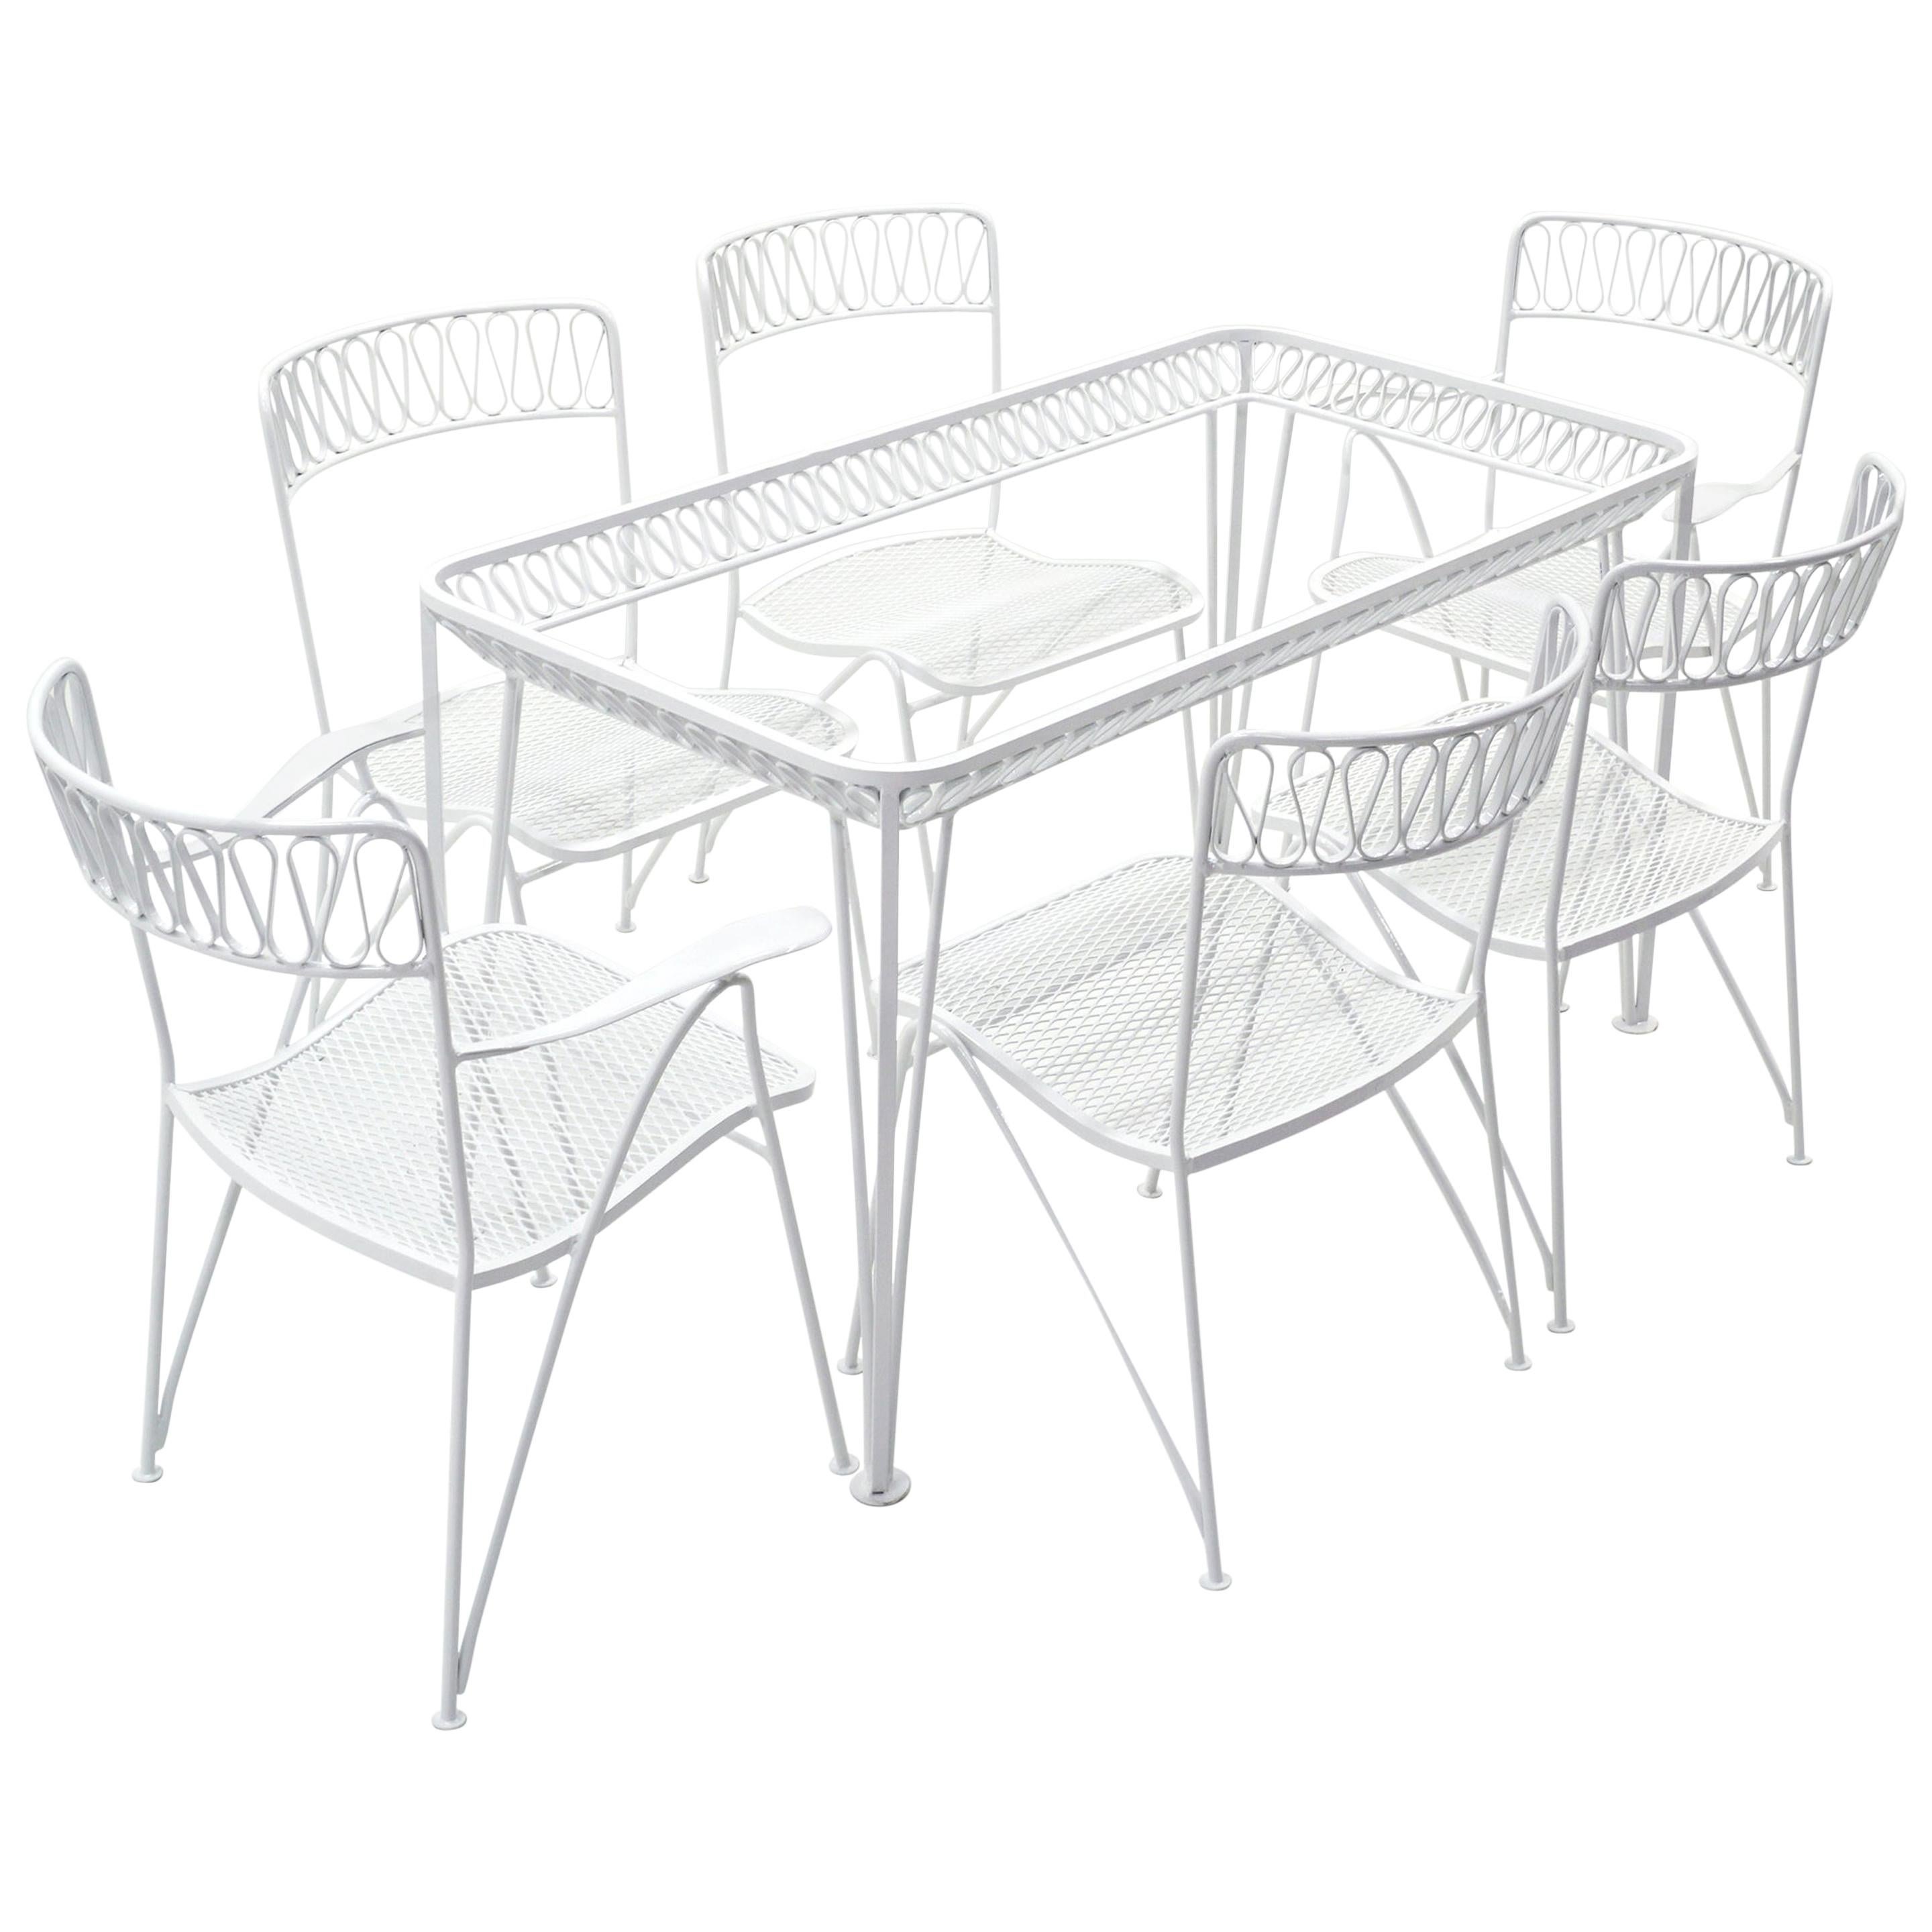 Outdoor Dining Table and Six Chairs by John Salterini, New White Powder Coat